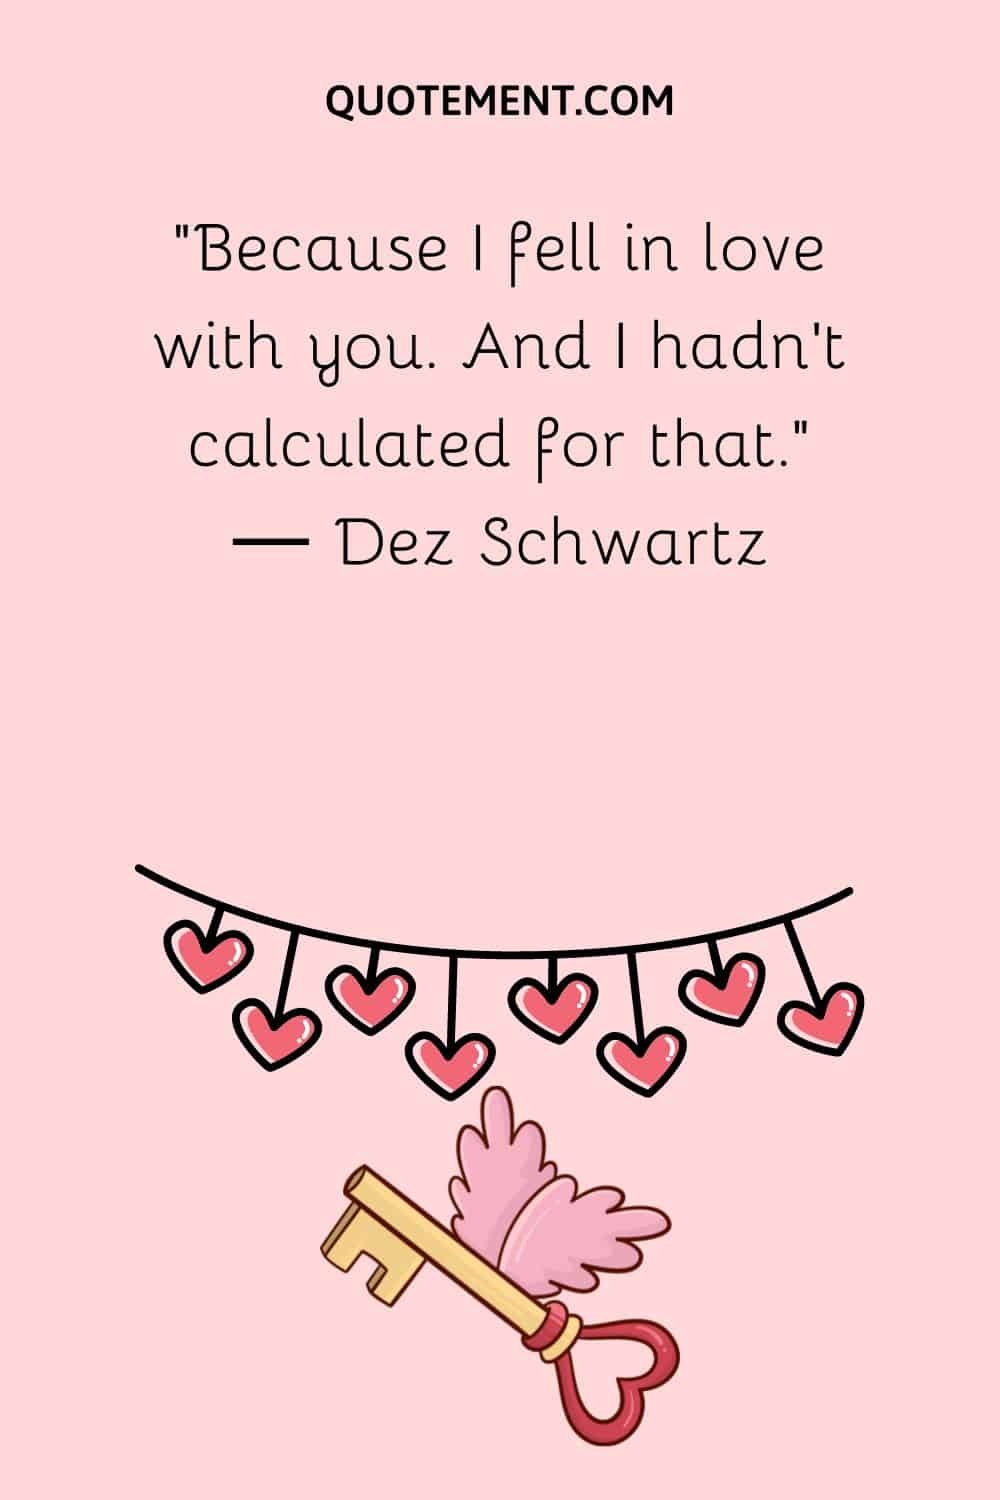 “Because I fell in love with you. And I hadn’t calculated for that.“ ― Dez Schwartz